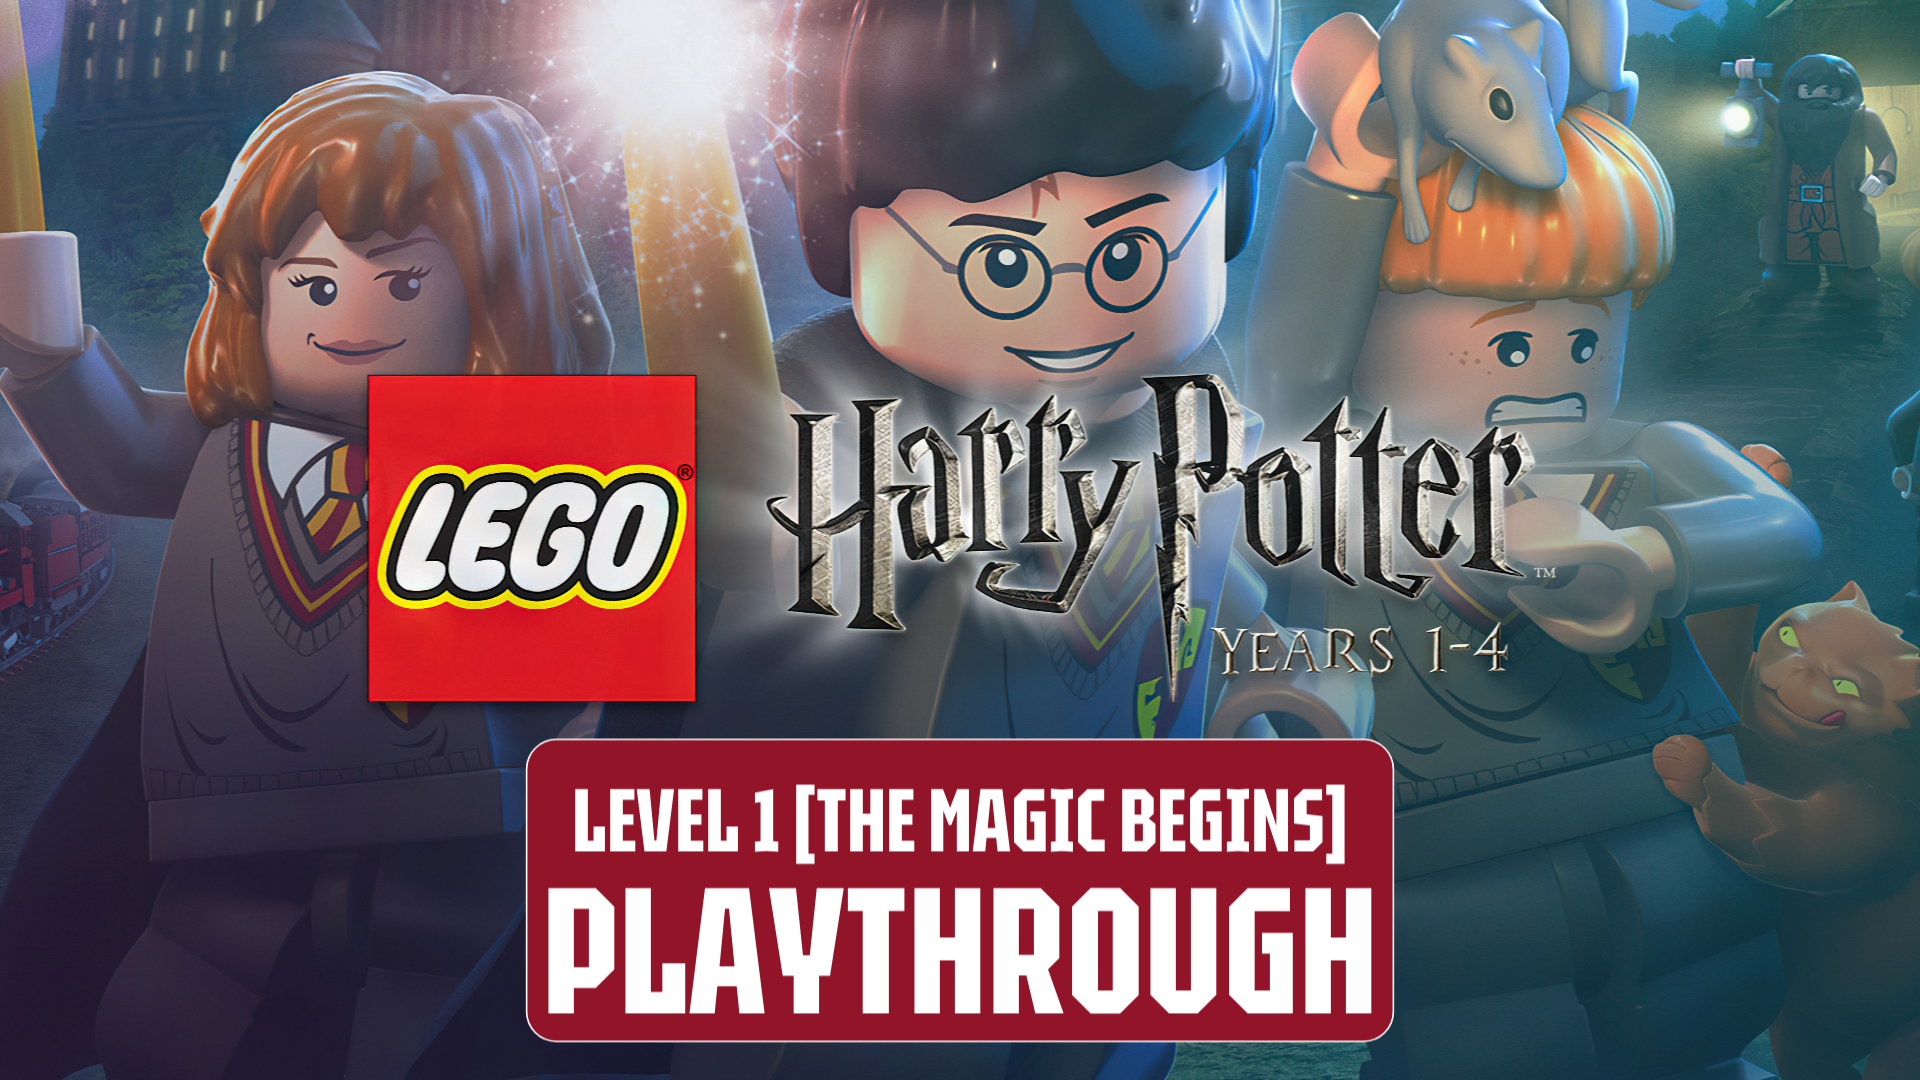 LEGO® HARRY POTTER: YEARS 1-4 | LEVEL 1 PLAYTHROUGH [THE MAGIC BEGINS] #harrypotter #lego